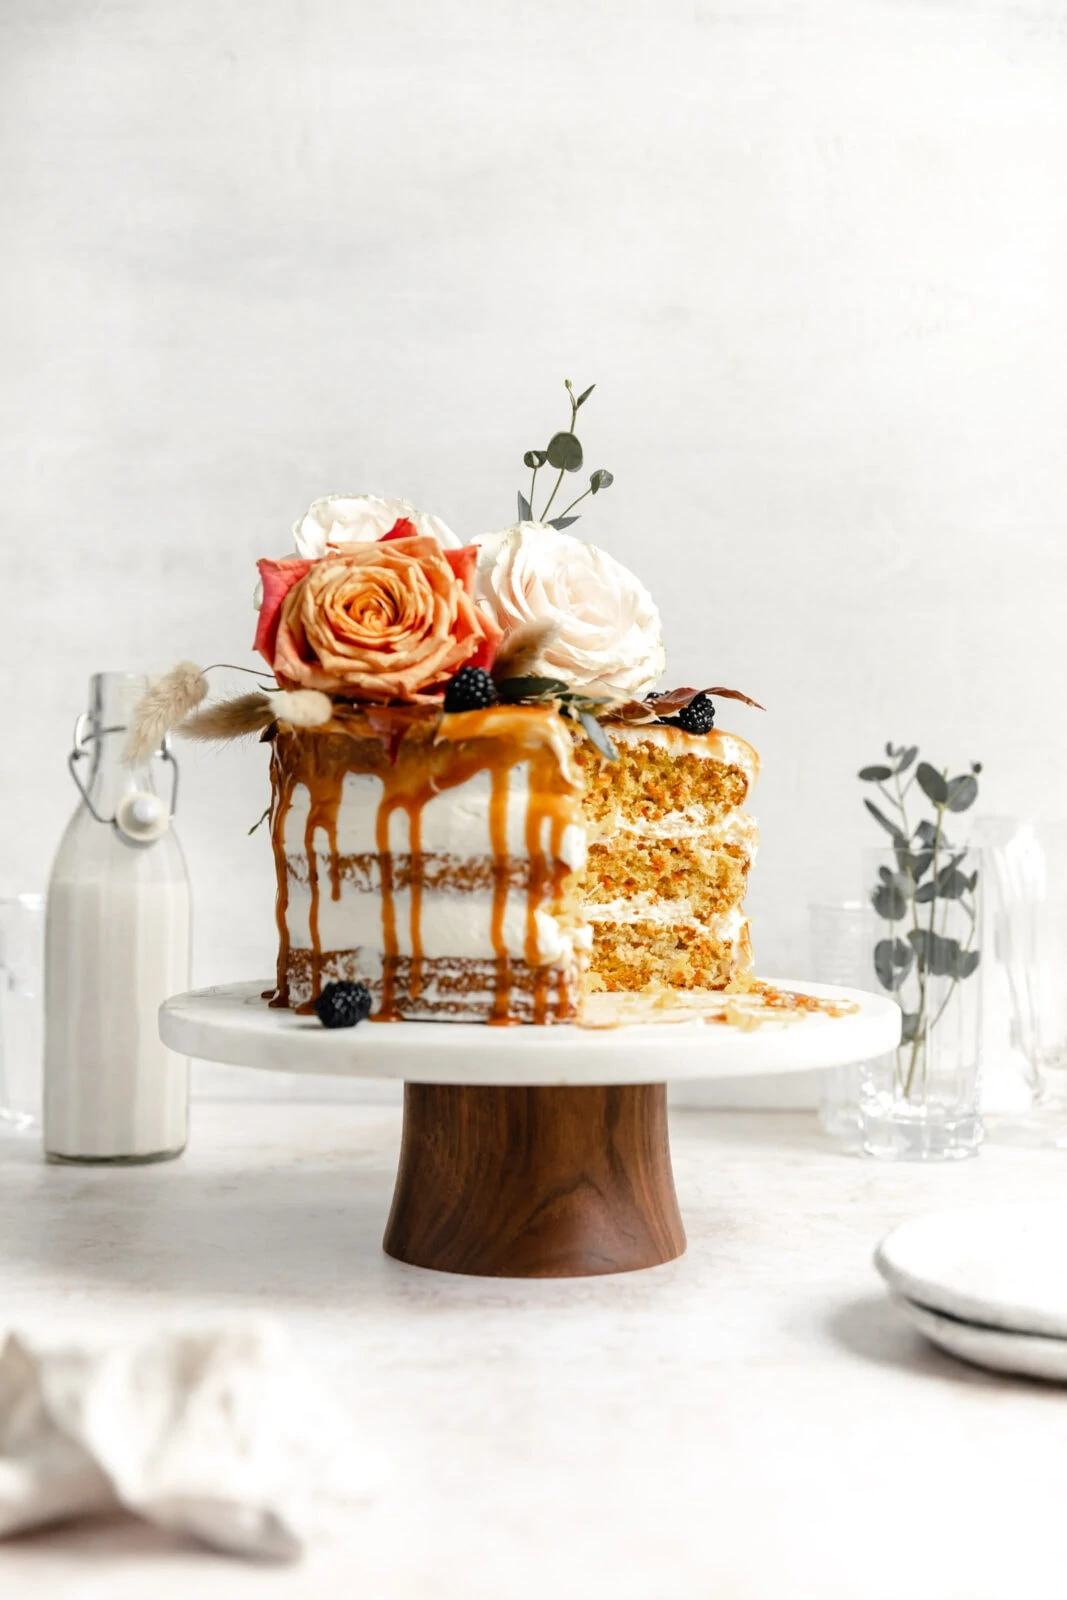 cardamom carrot cake with caramel and flowers